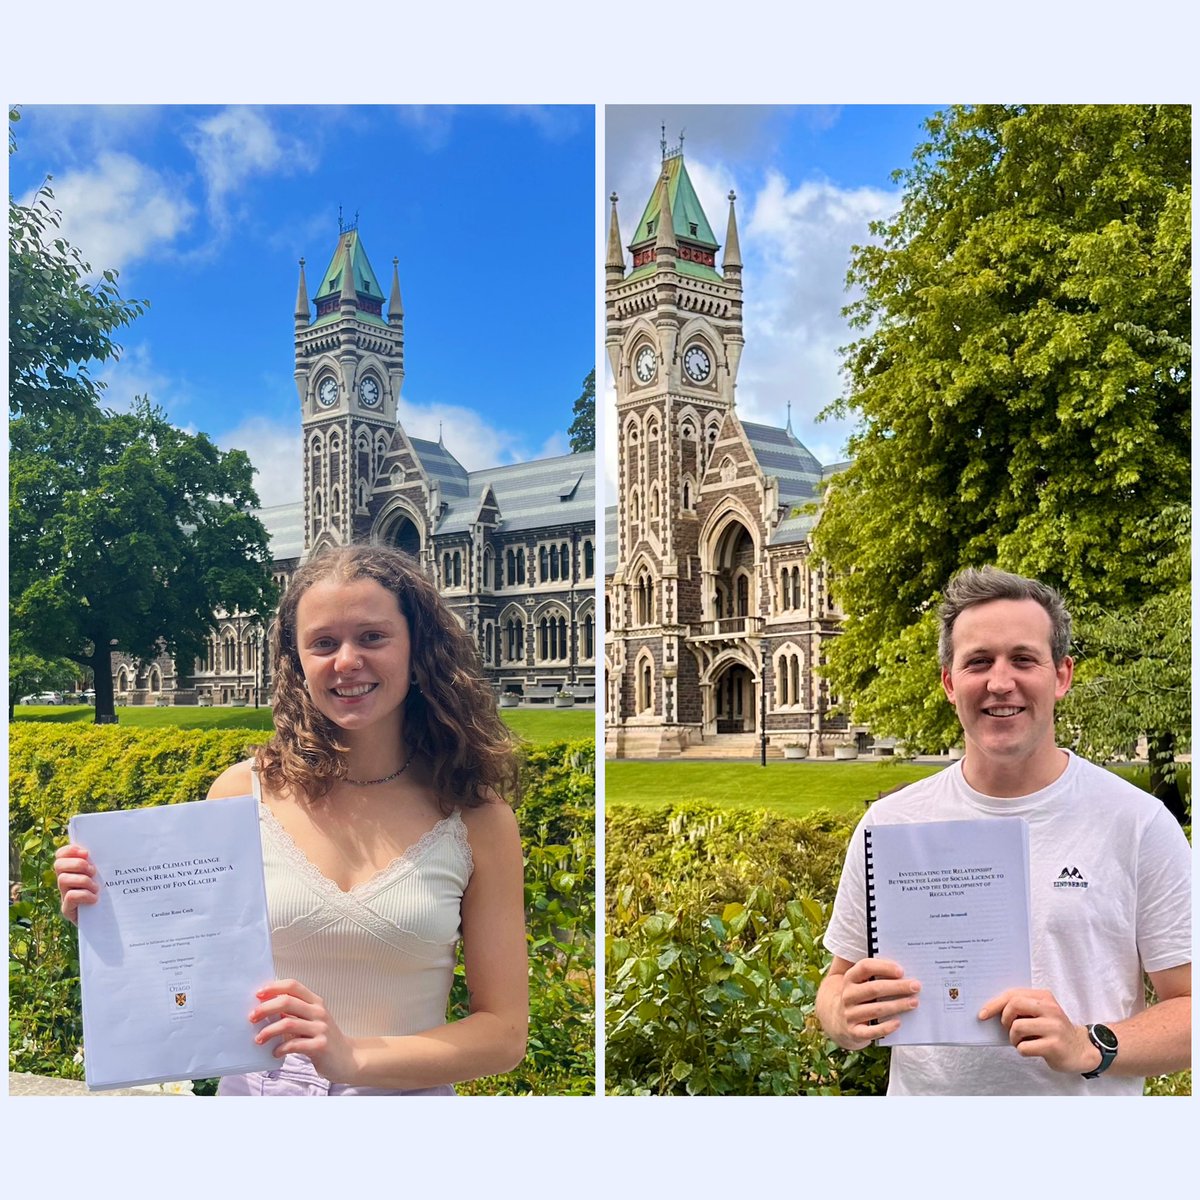 👏🏽👏🏽 #MPlan candidates Caroline Cech & Jared Brenssell have submitted their theses. Caroline’s is “Planning for #ClimateChange #Adaptation in Rural NZ: Fox Glacier”.  Jared’s is “Investigating the Relationship Betw the Loss of #SocialLicence to #Farm & the Develt of Regulation”🥳